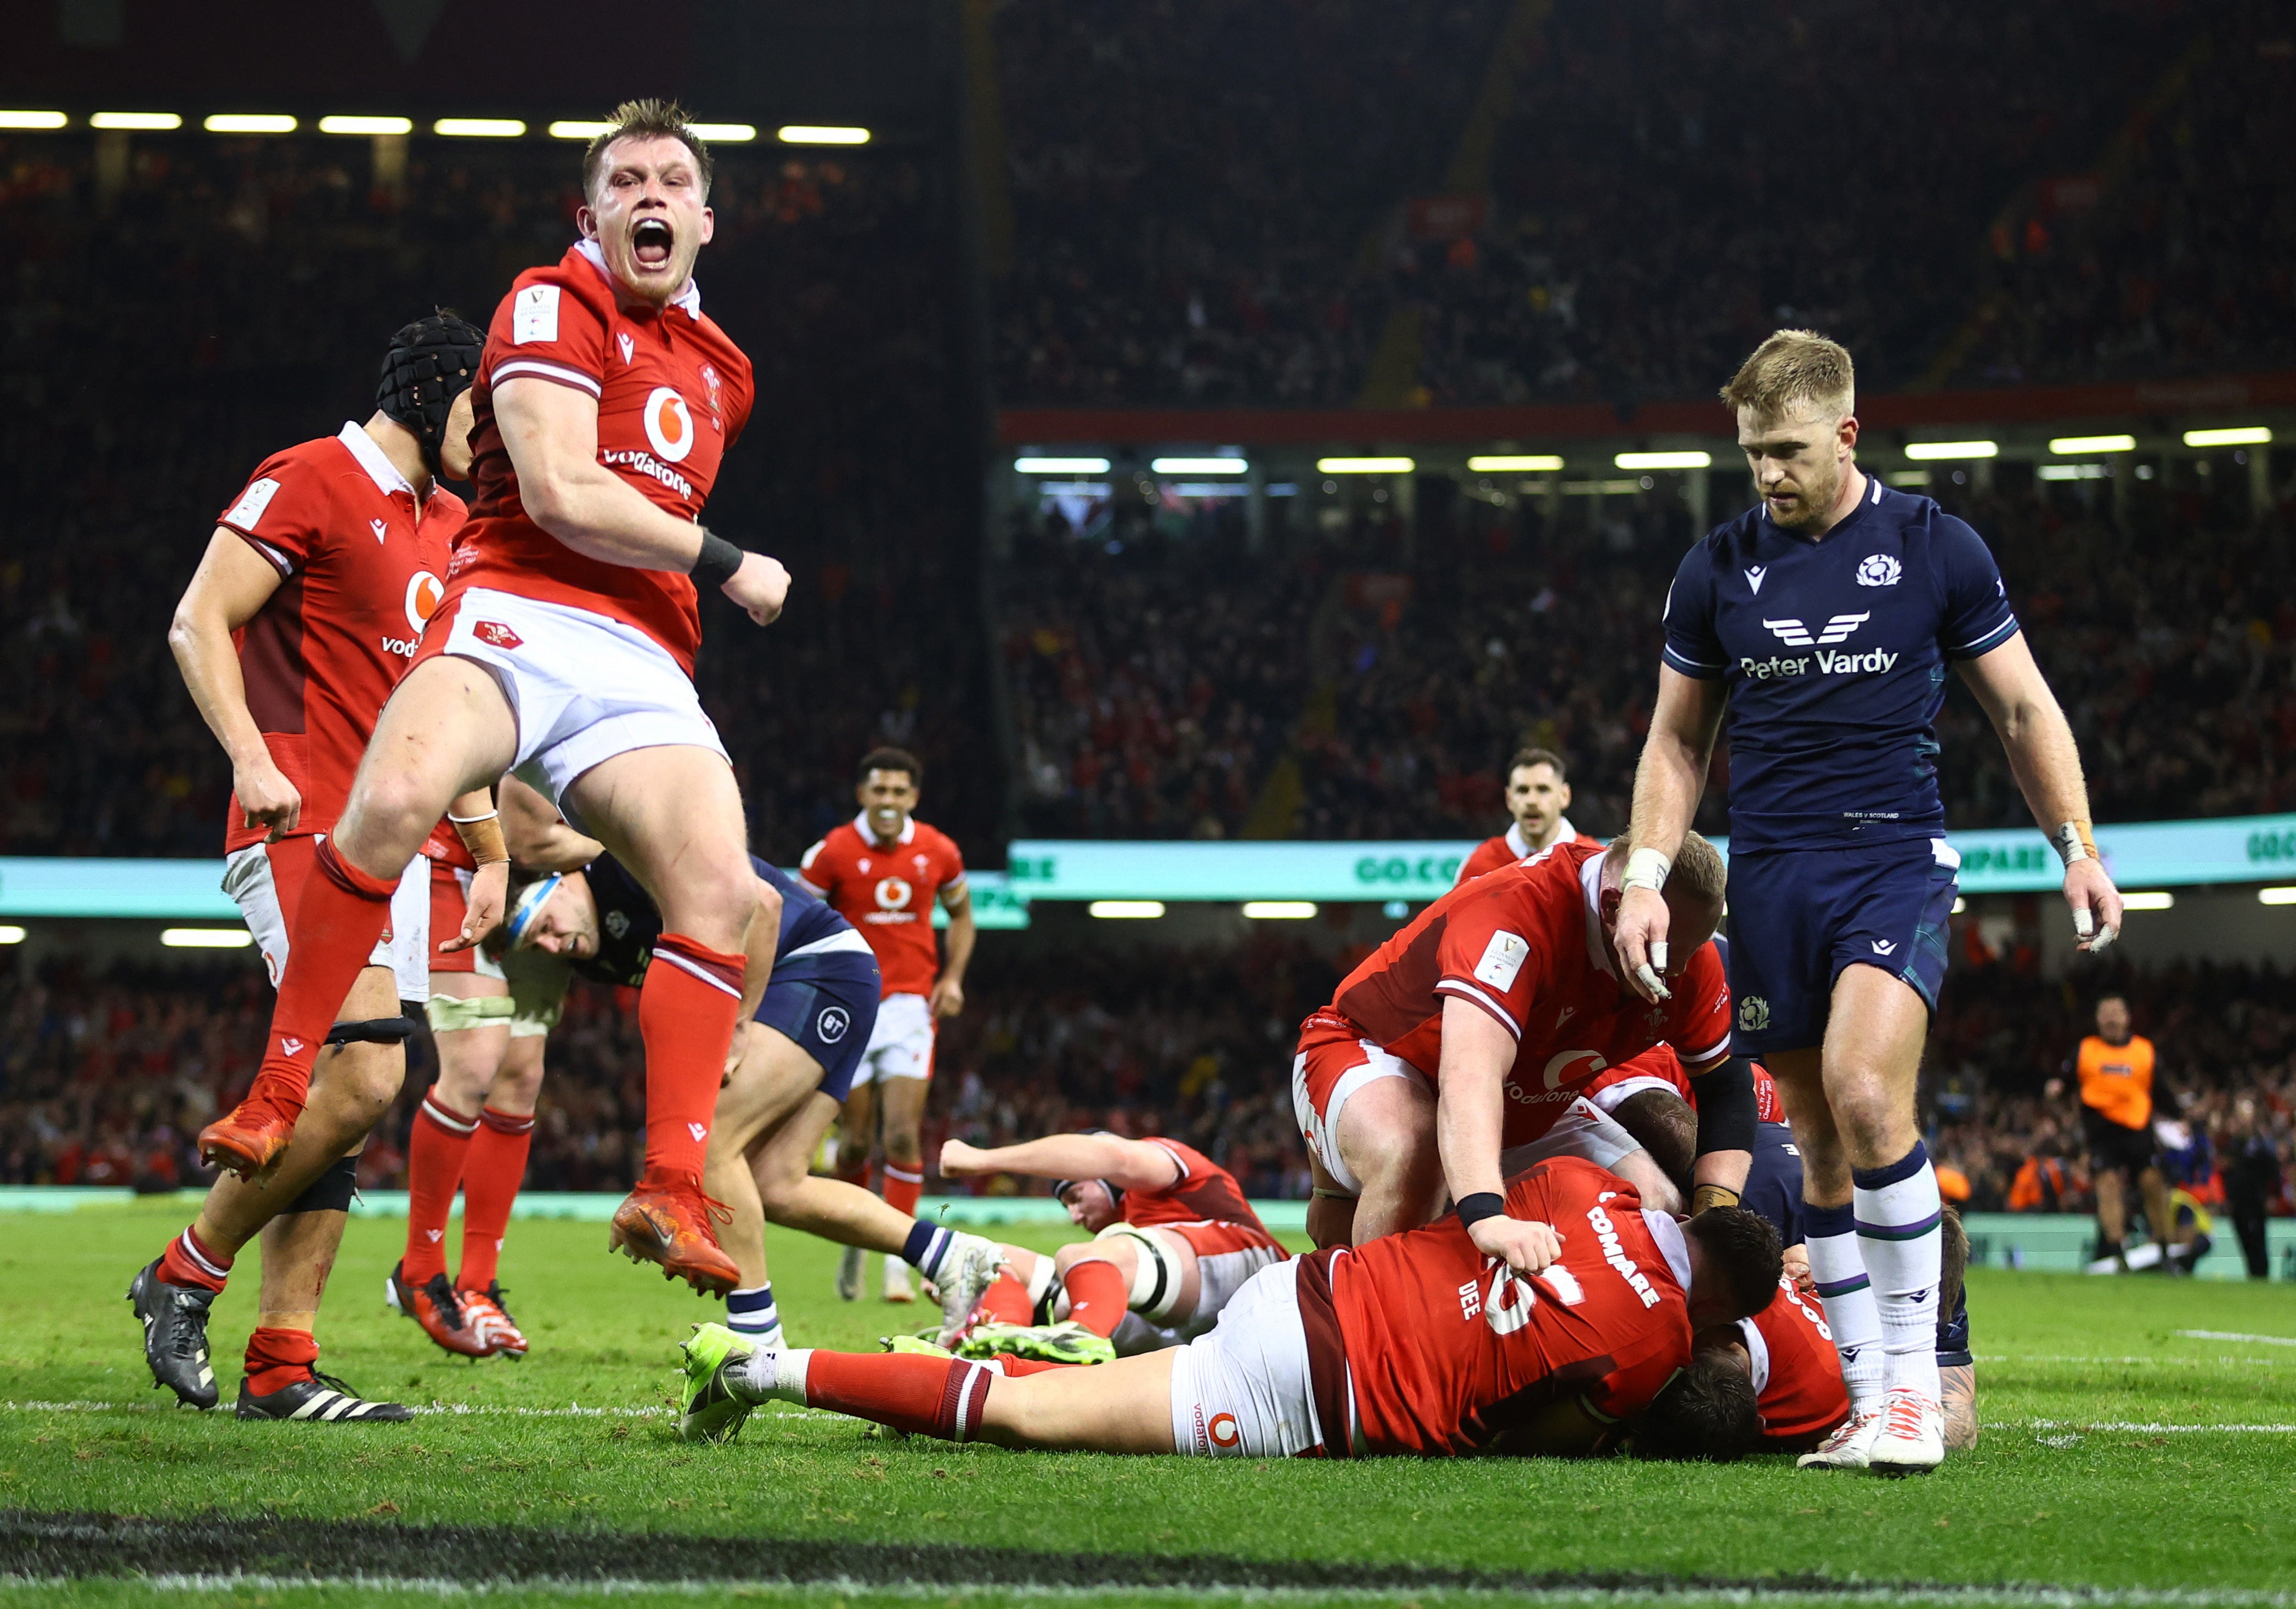 Wales roared back with a bonus-point from Alex Mann but came up just short at the final whistle